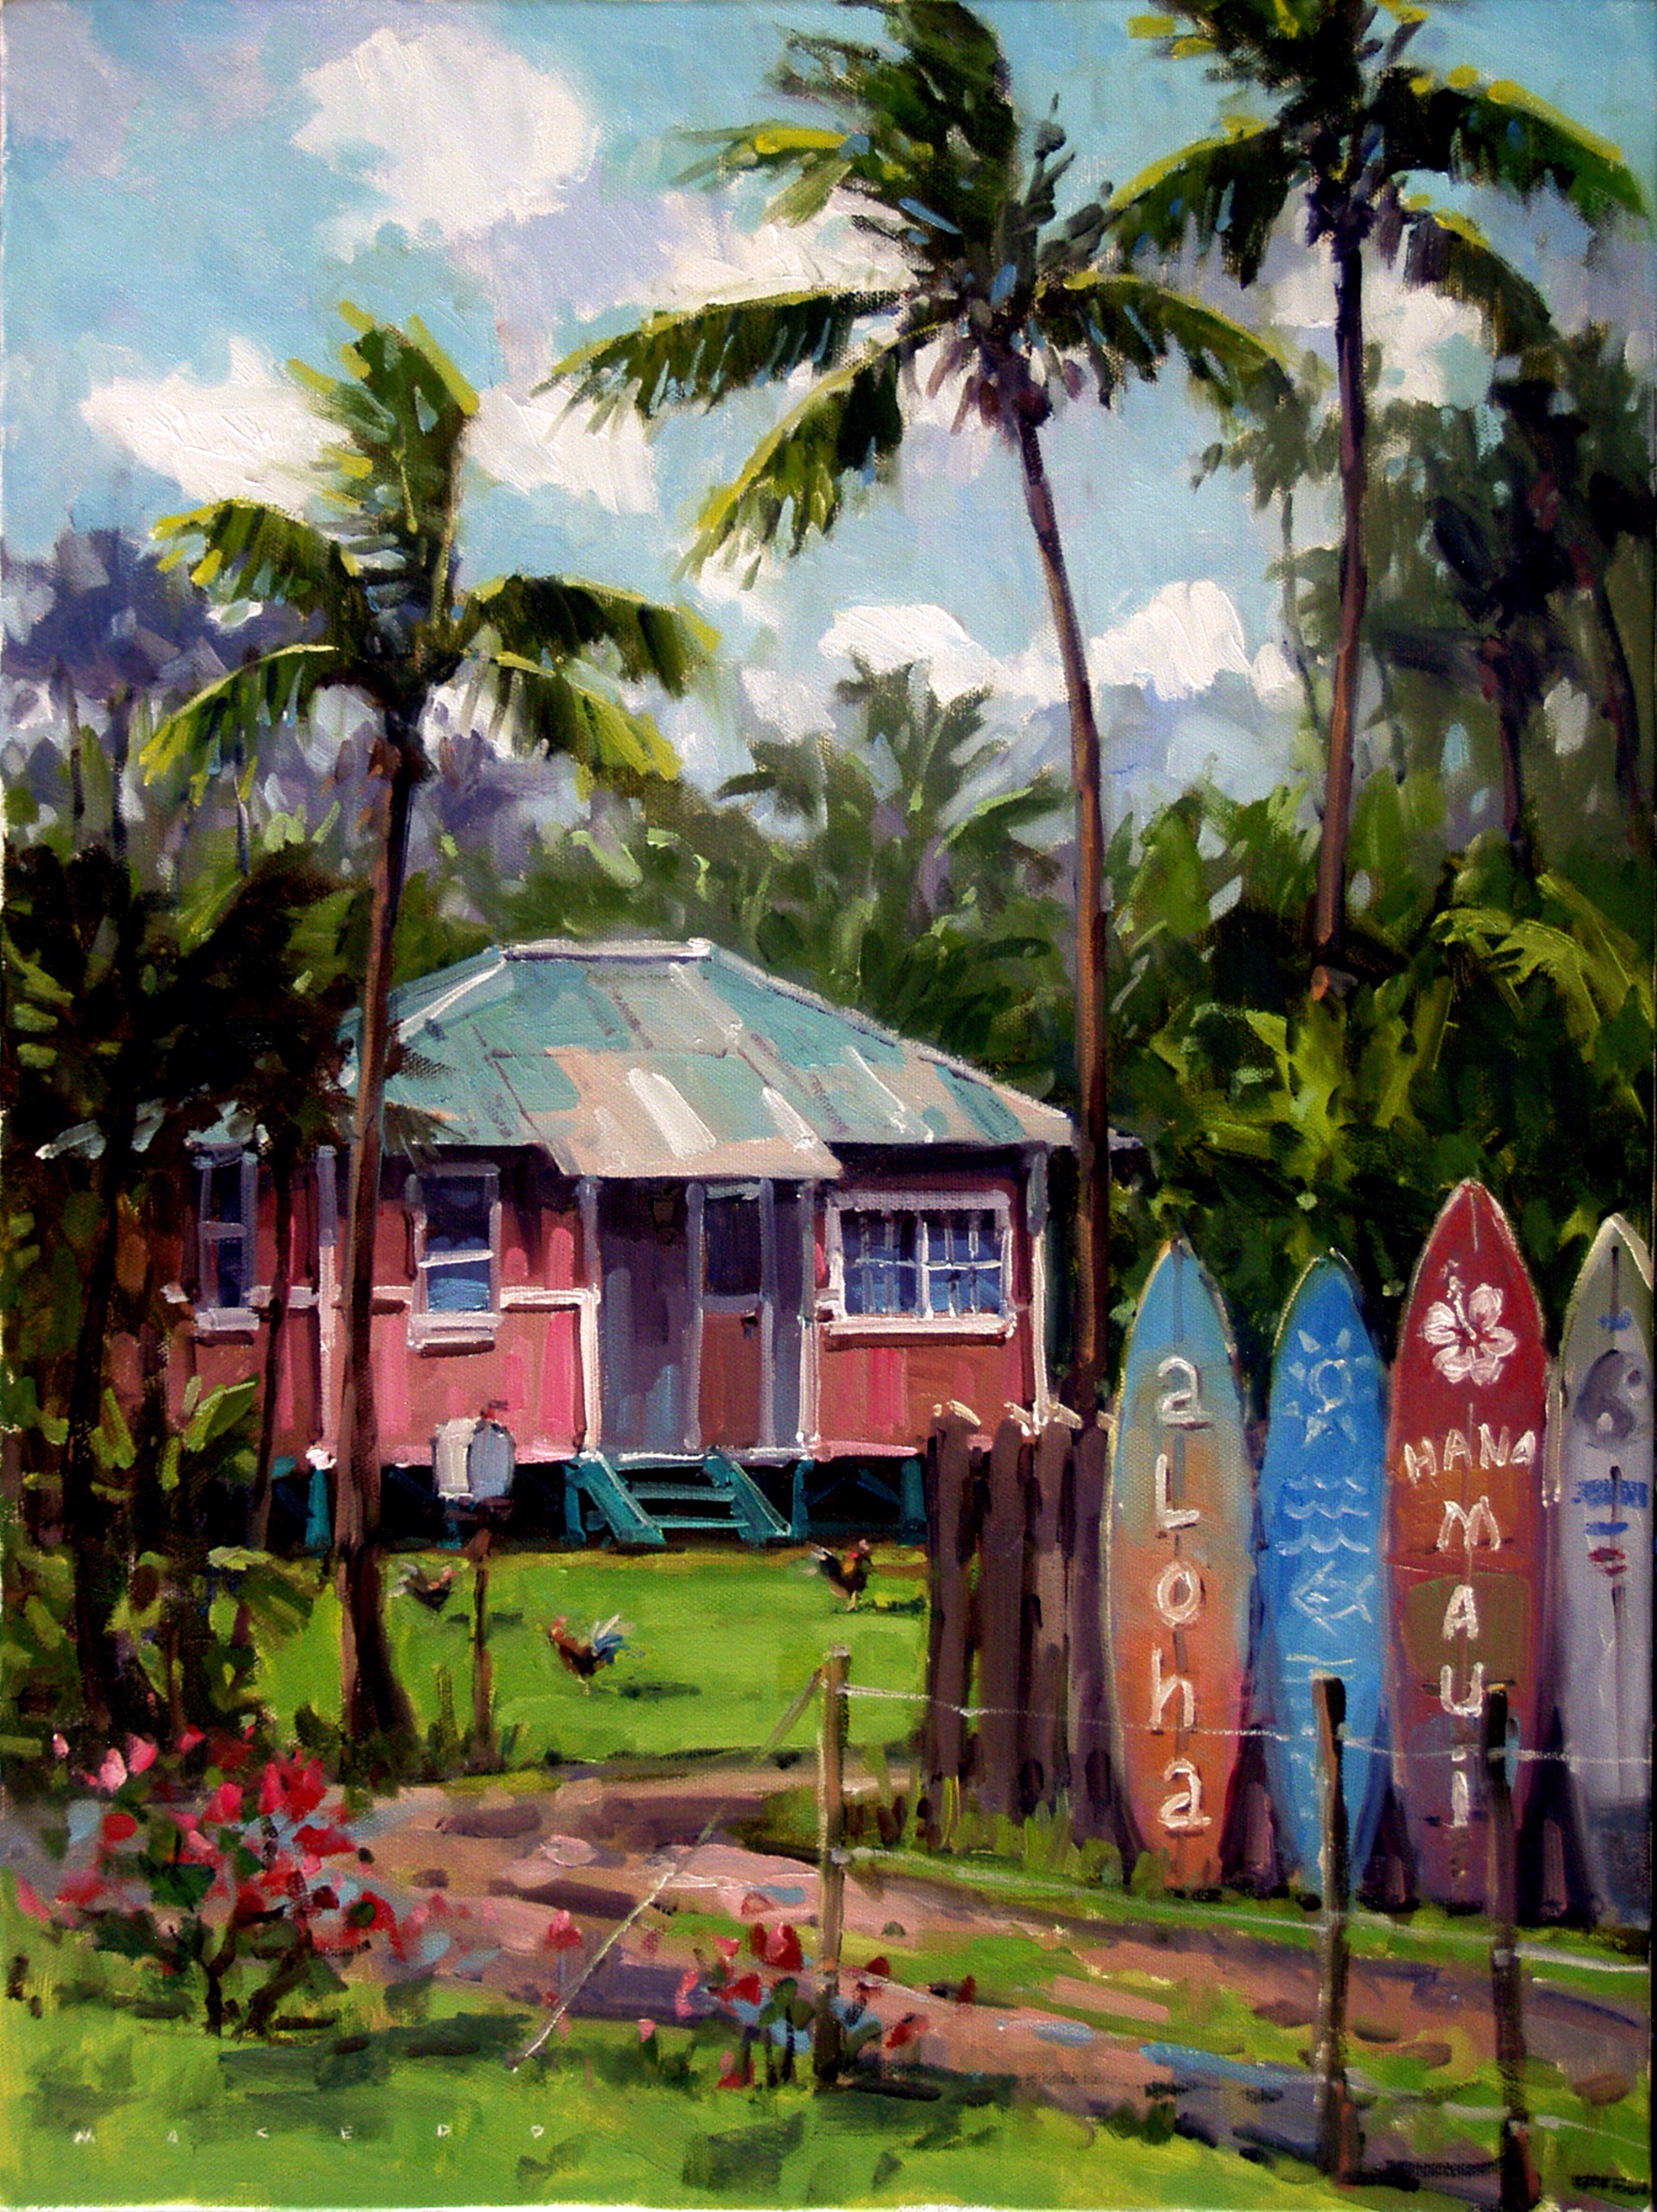 Hana Shack - SOLD by Commission Possibilities / Previously Sold ZX